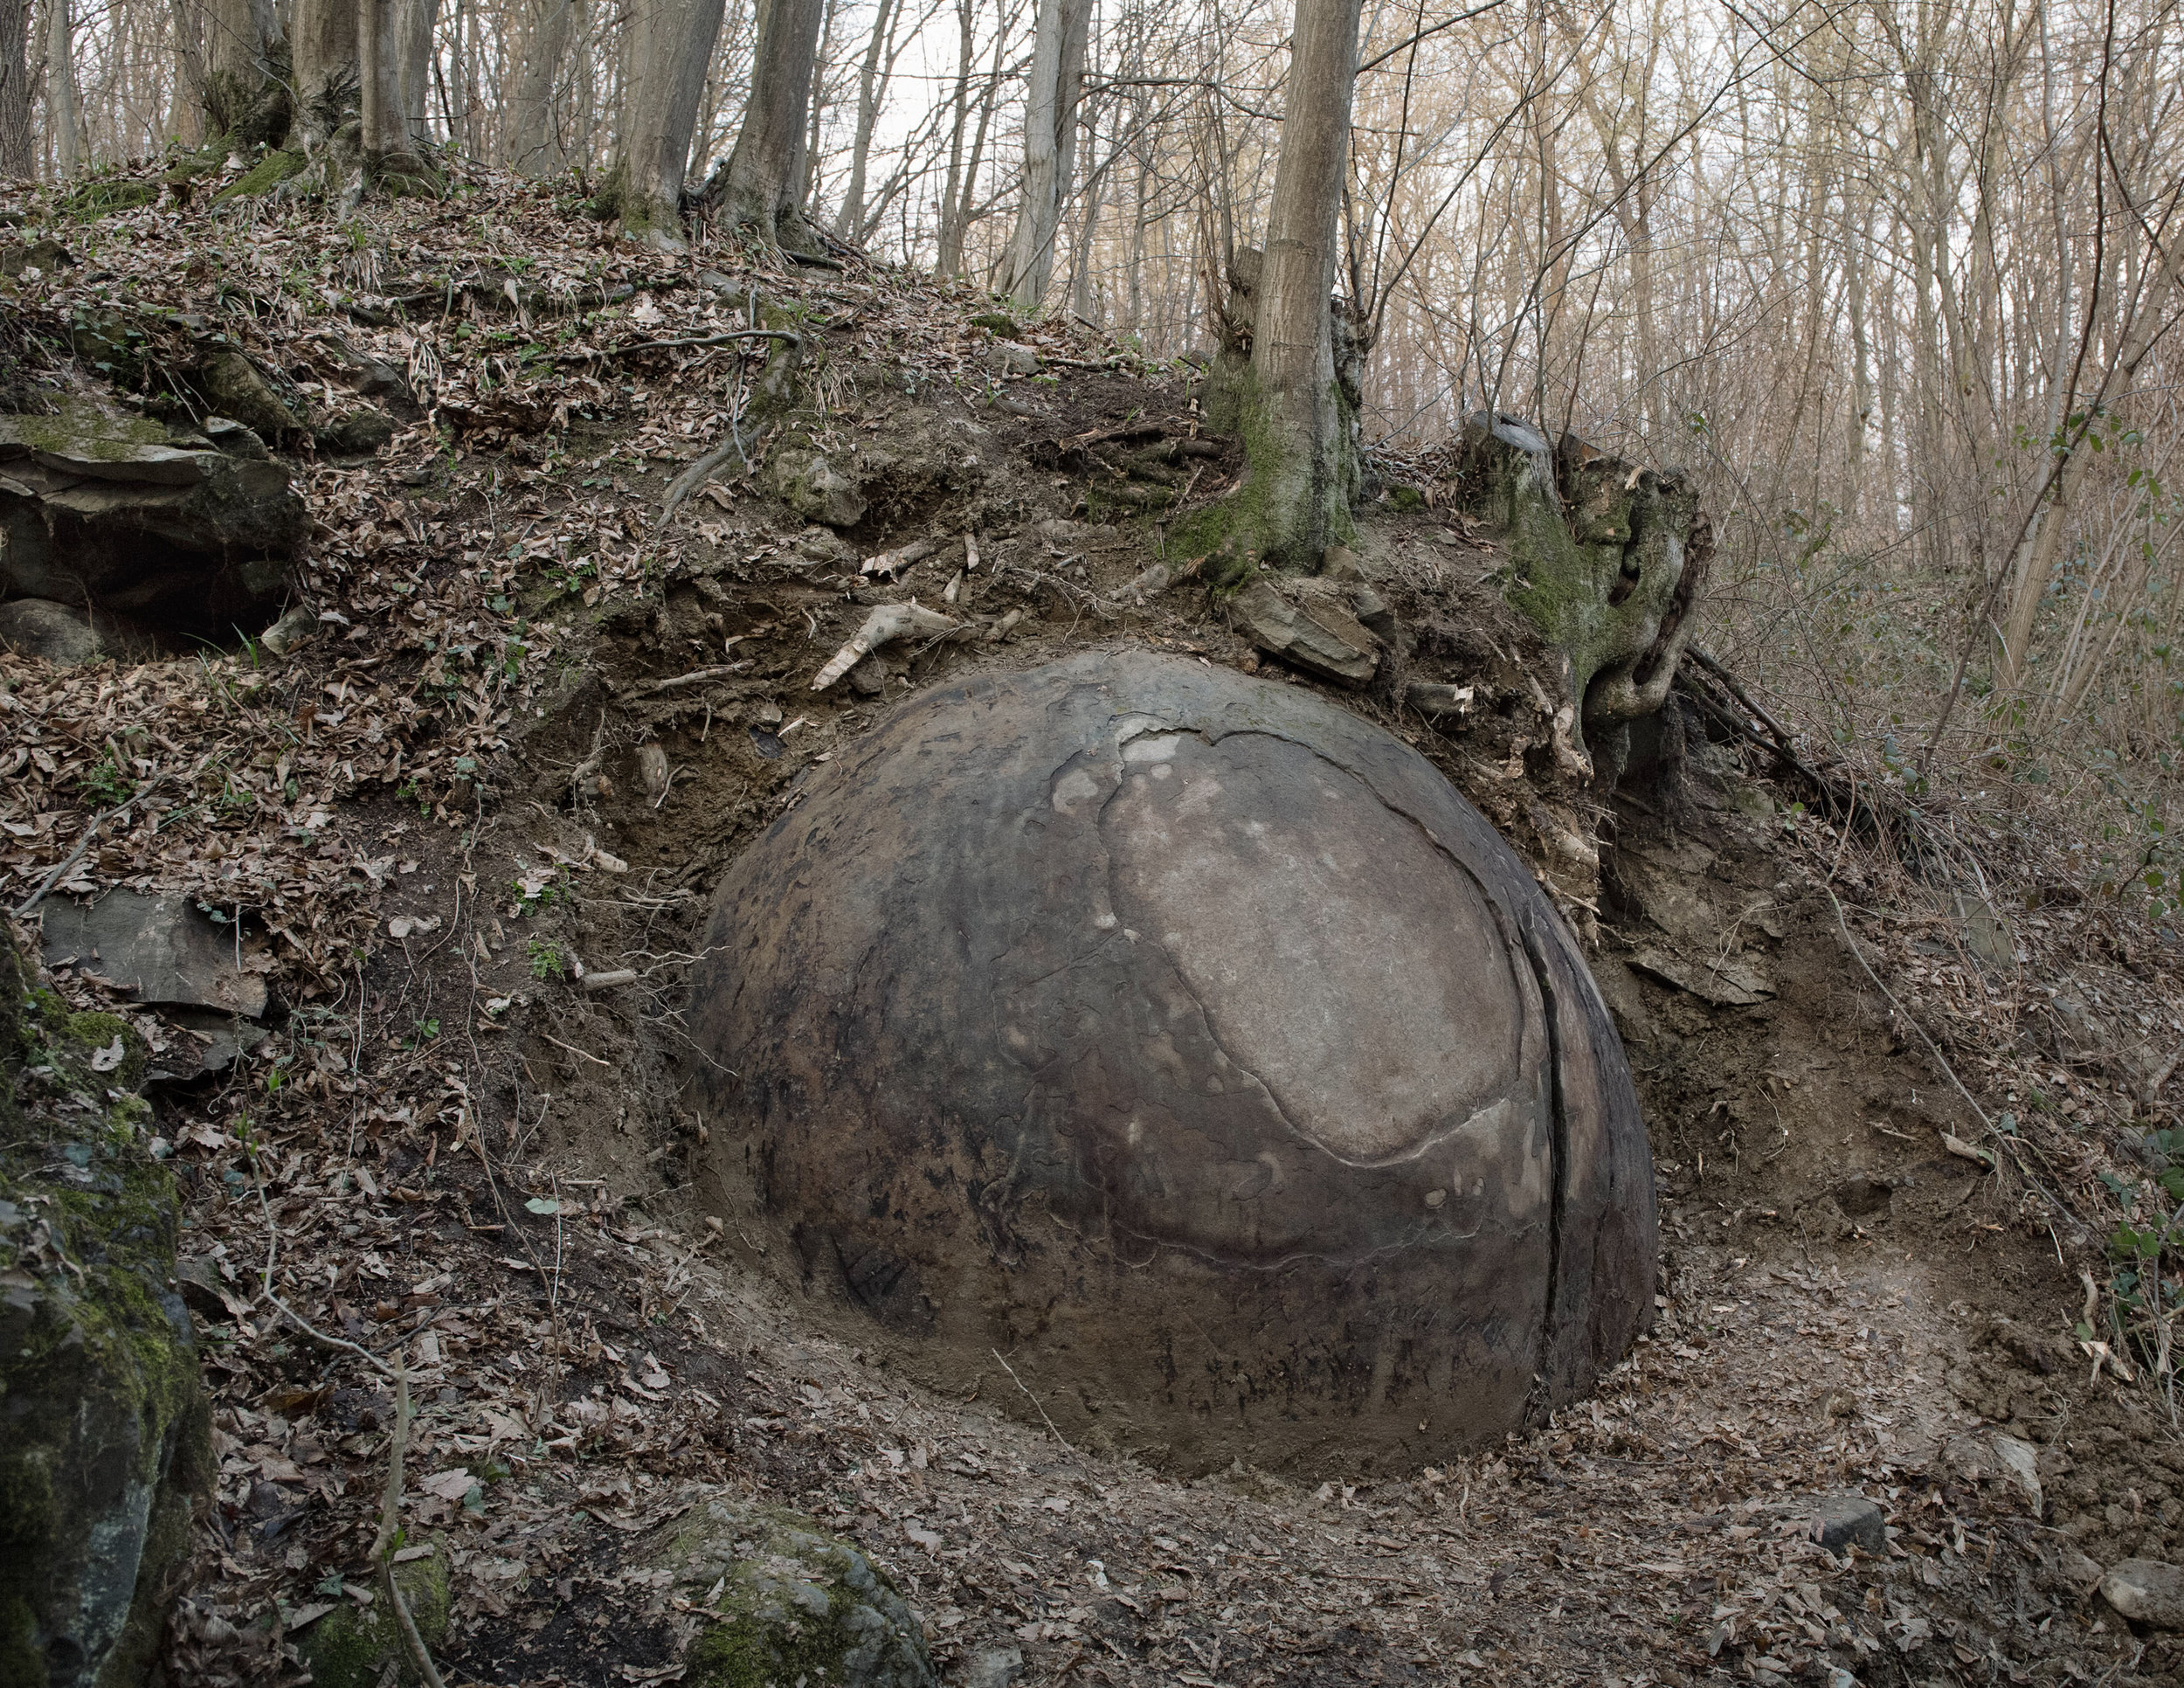   BIGGEST STONE BALL IN EUROPE JUST DISCOVERED IN BOSNIA    Written by Dr. Sam Osmanagić, Ph.D. Friday, 25 March 2016 11:01   I’ve been researching prehistoric stone ball phenomenon for 15 years. I’ve visited several times shaped granite stone balls 